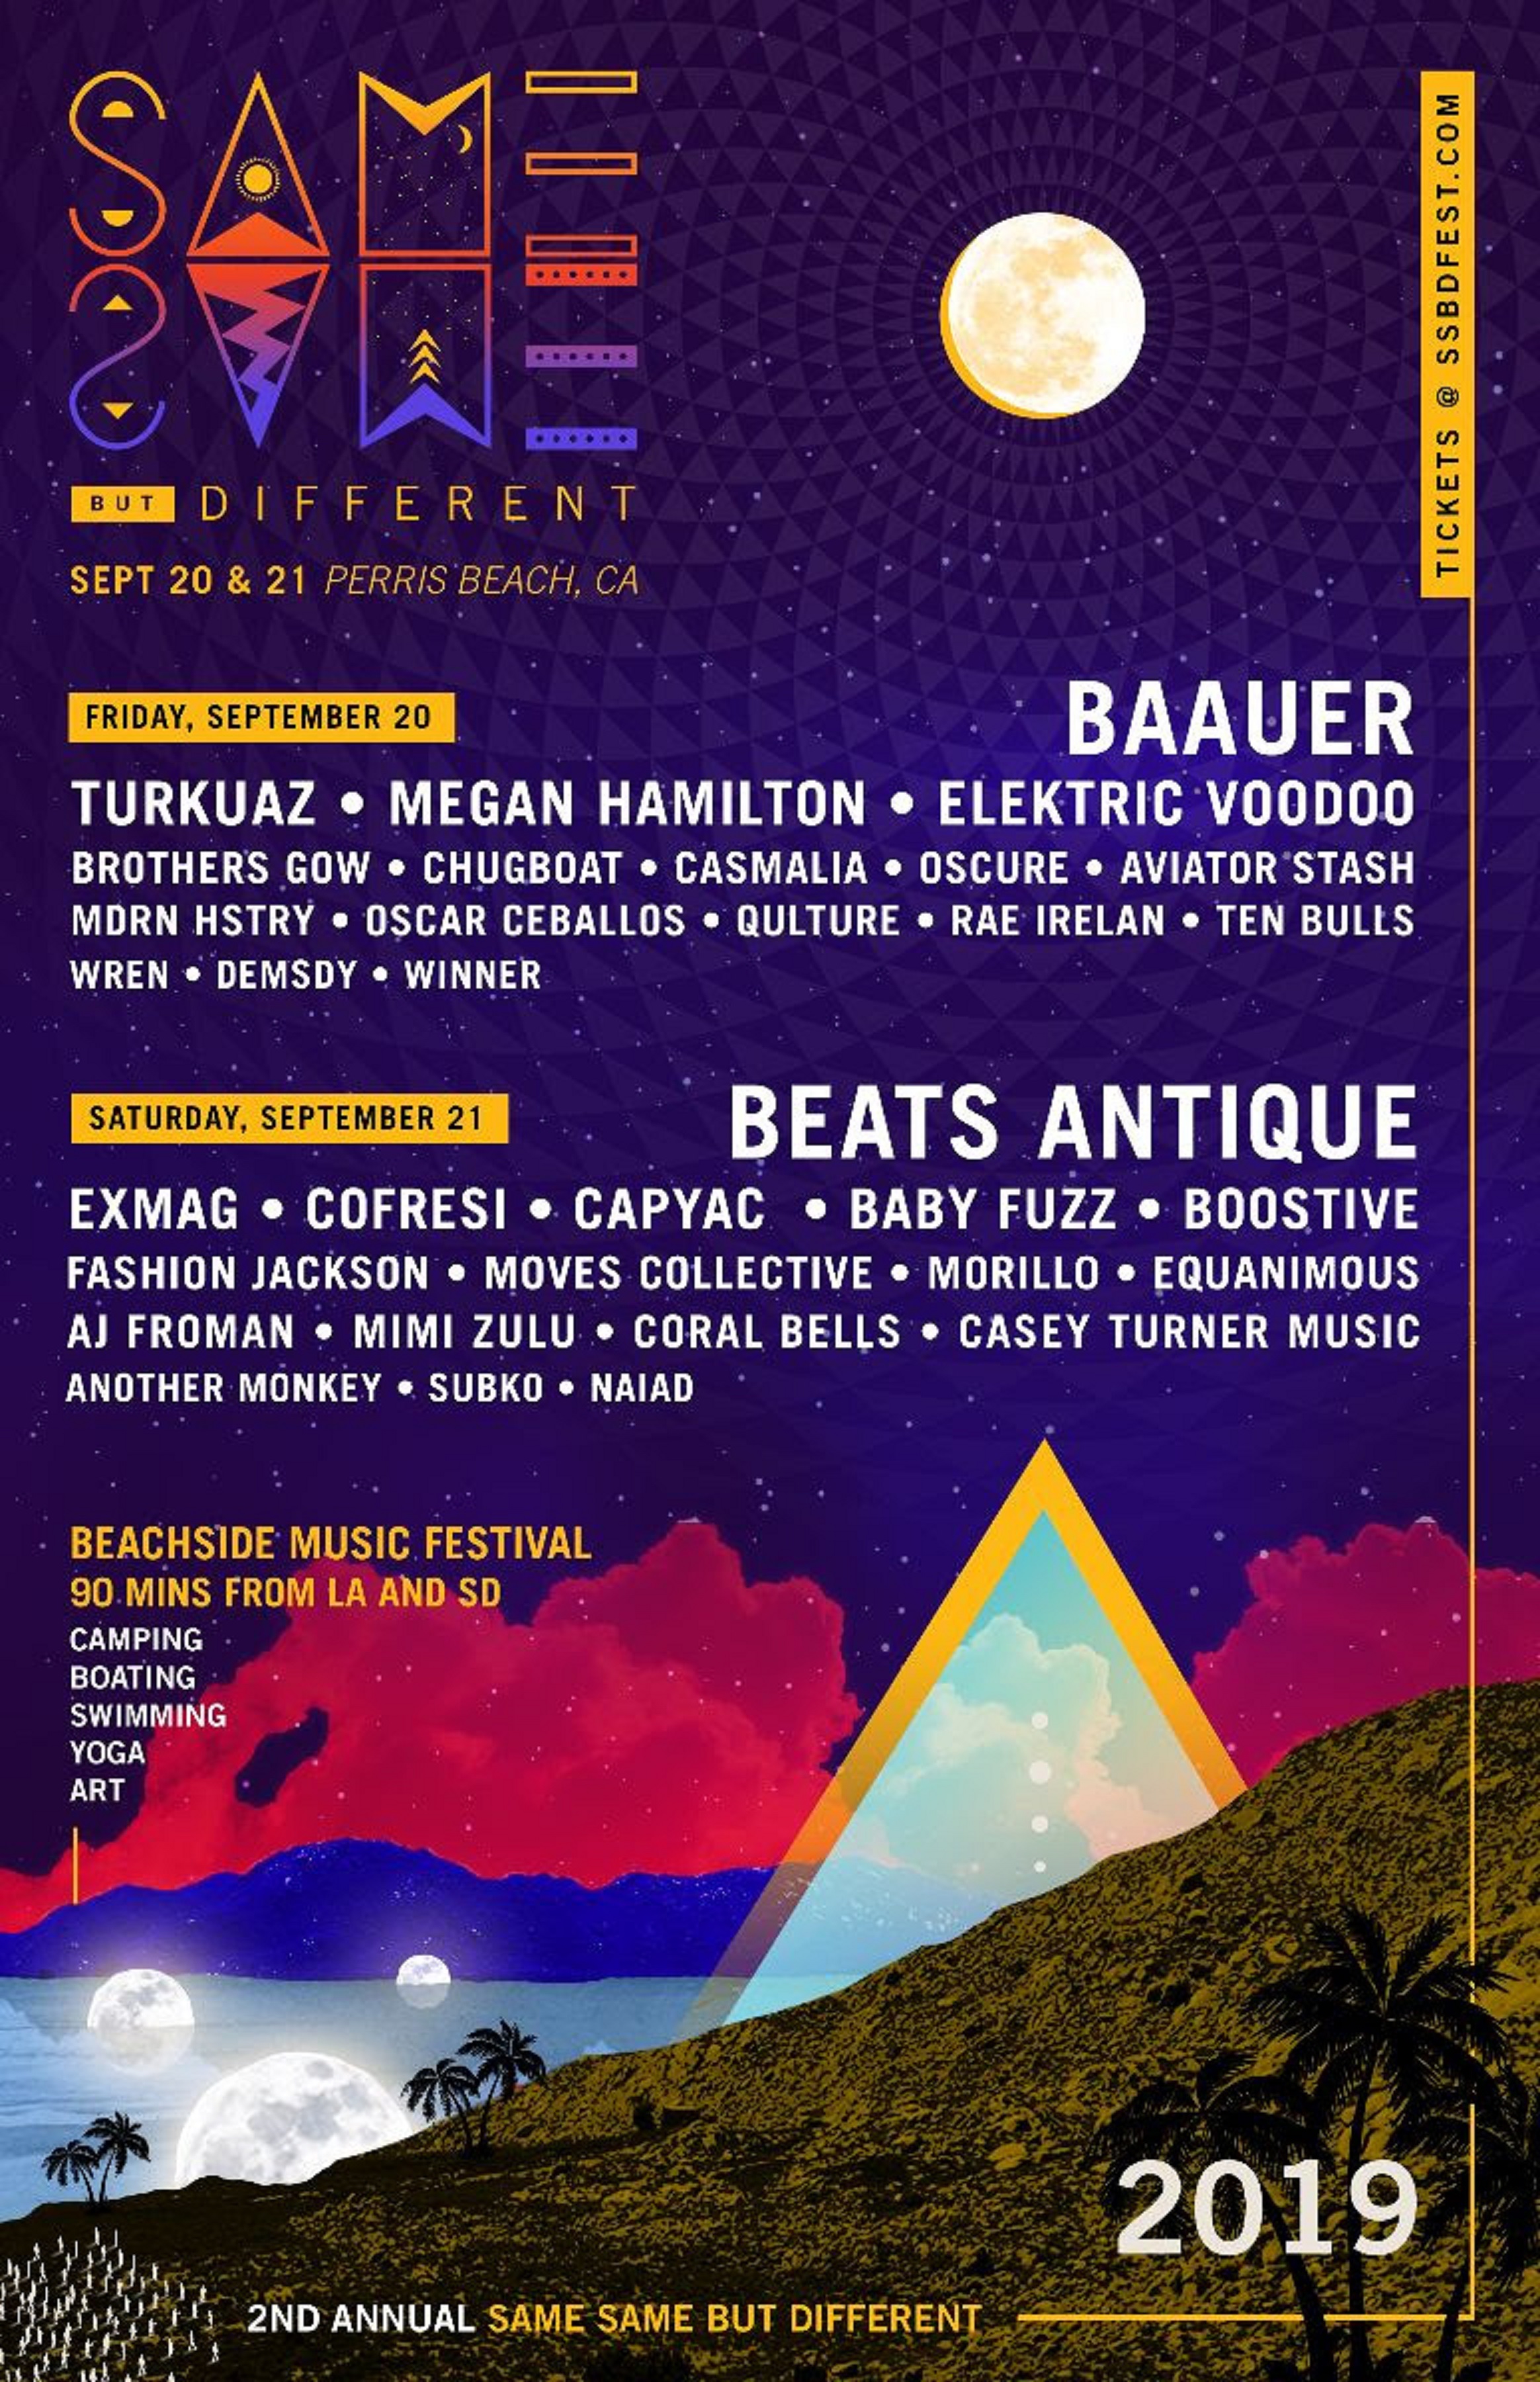 SAME SAME BUT DIFFERENT Announces Daily Lineup and Artist Additions